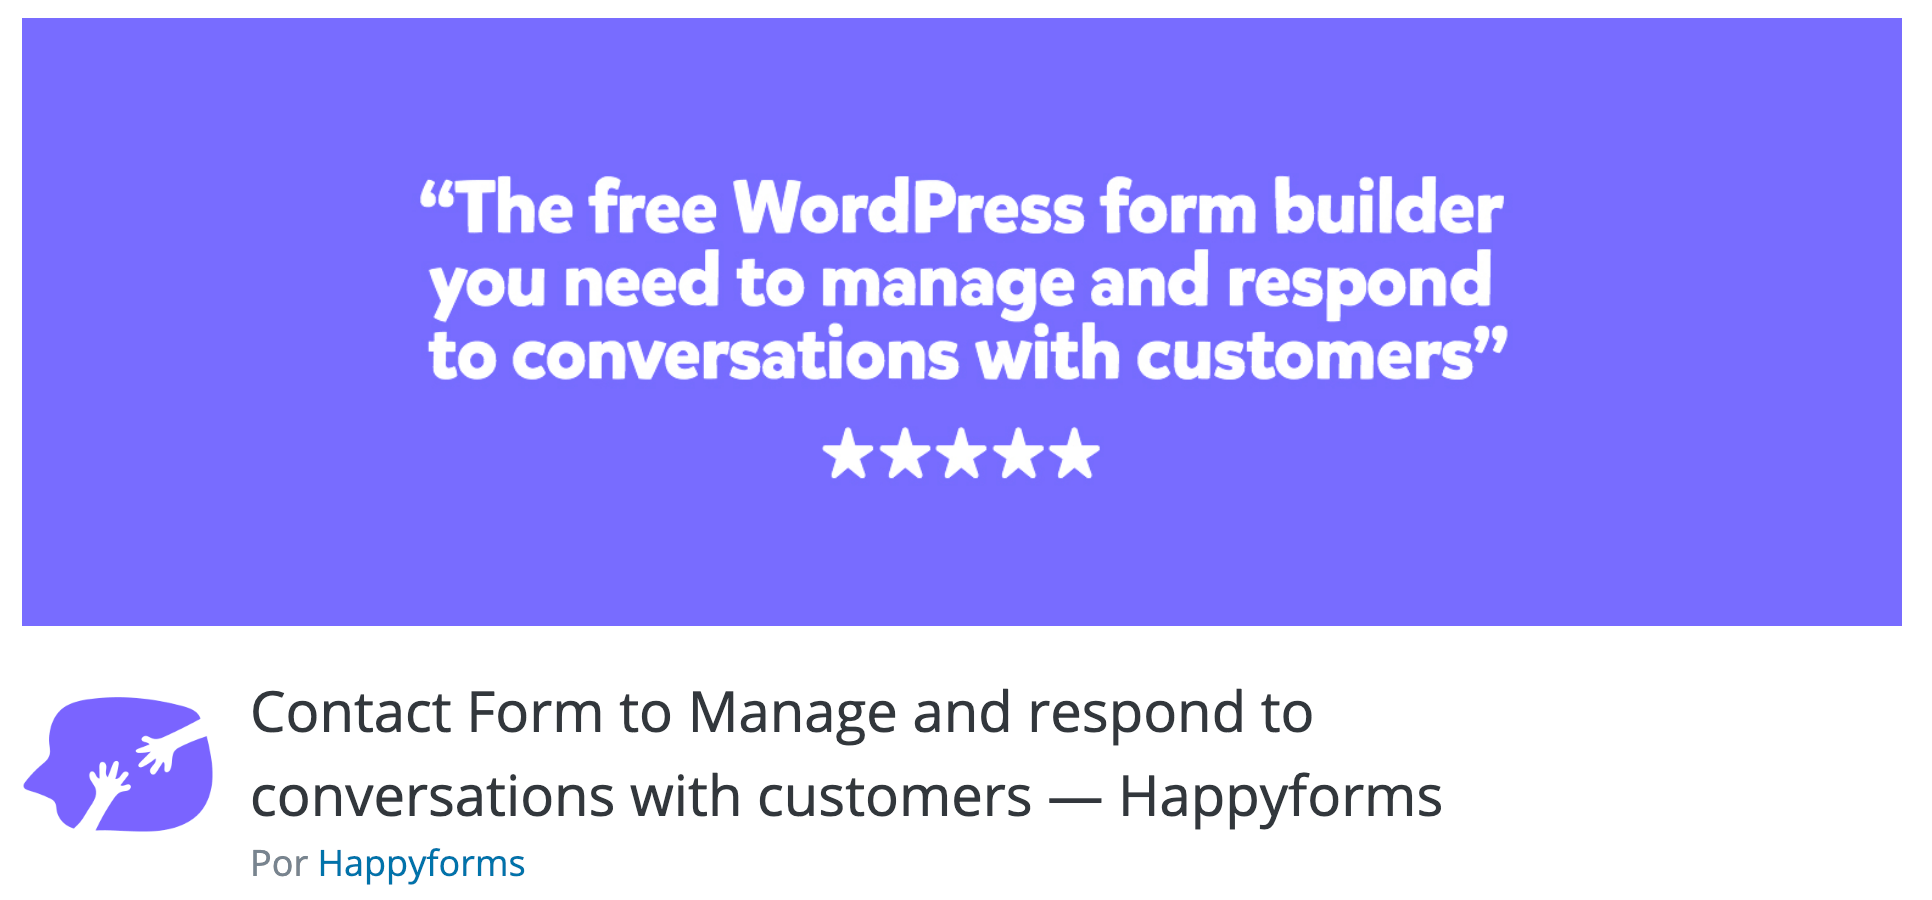 Contact Form to Manage and respond to conversations with customers — Happyforms